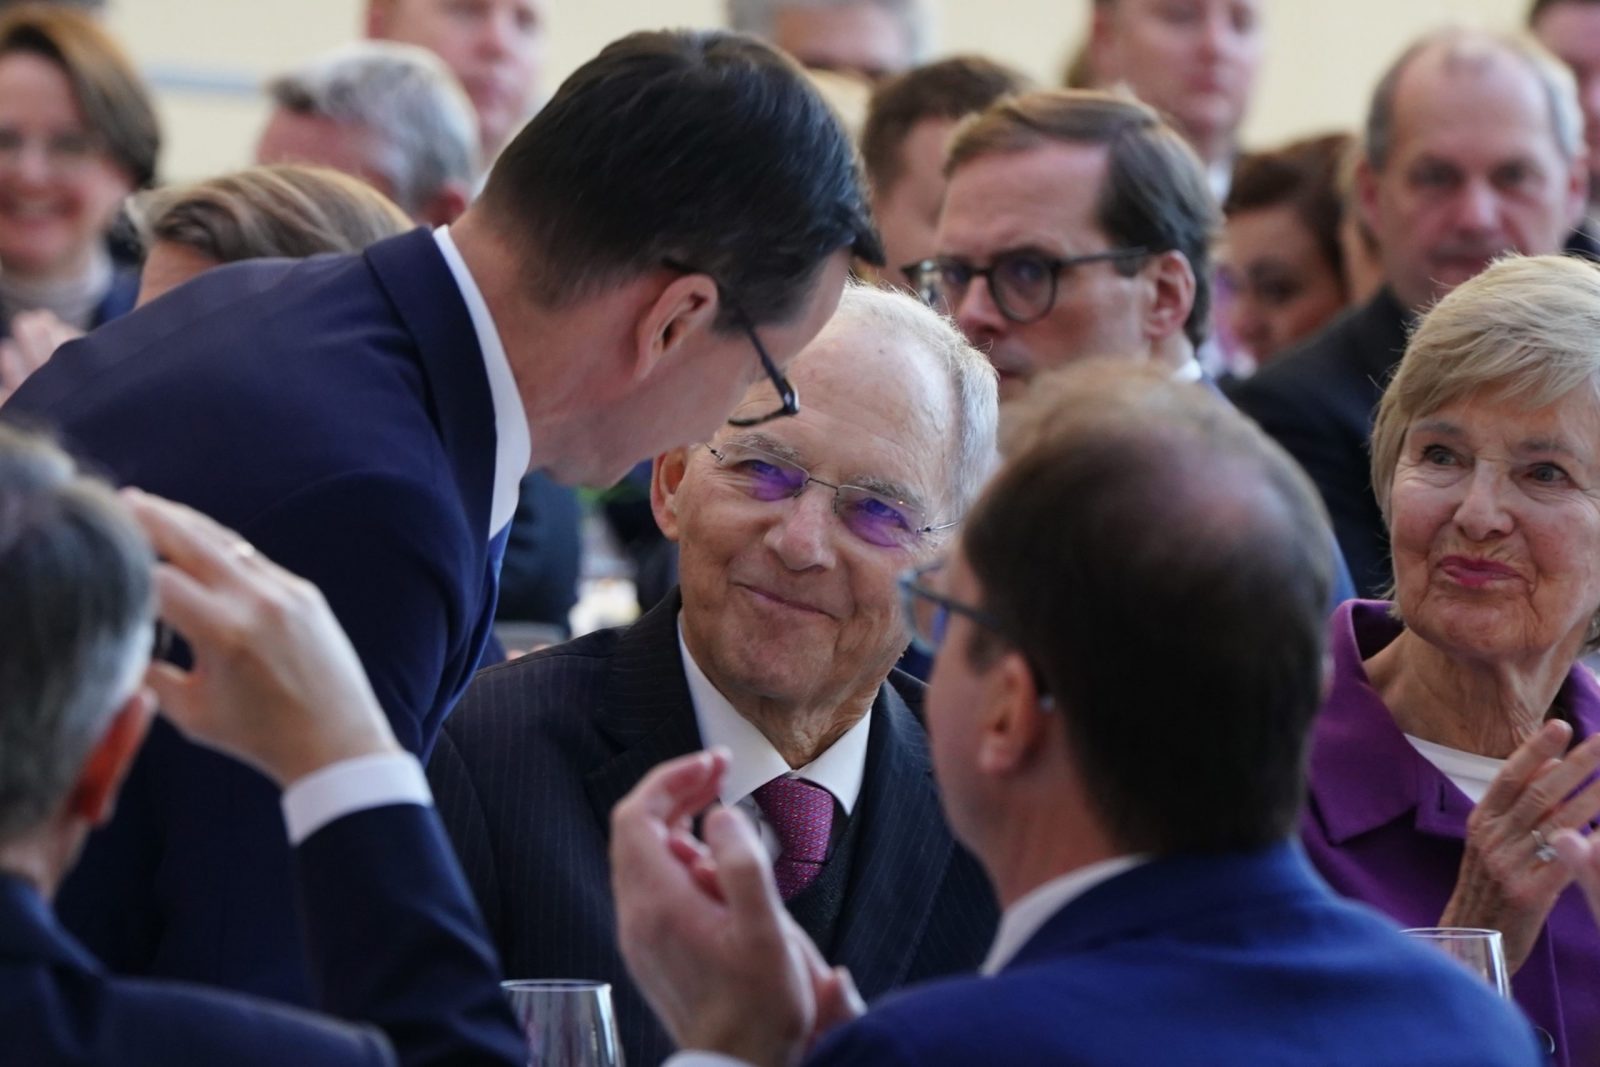 epa10408870 Polish Prime Minister Mateusz Morawiecki (L) talks after his speech to former German Parliament ‘Bundestag’ president Wolfgang Schaeuble (C) during a festive event on the occasion of Wolfgang Schauble's 50th anniversary in parliament, in Berlin, Germany, 16 January 2023. Former German Parliament 'Bundestag' president Wolfgang Schaeuble has served for more than half a century as a member of the German parliament ‘Bundestag. He is the first deputy having participated in parliament for such a long time.  EPA/CLEMENS BILAN / POOL